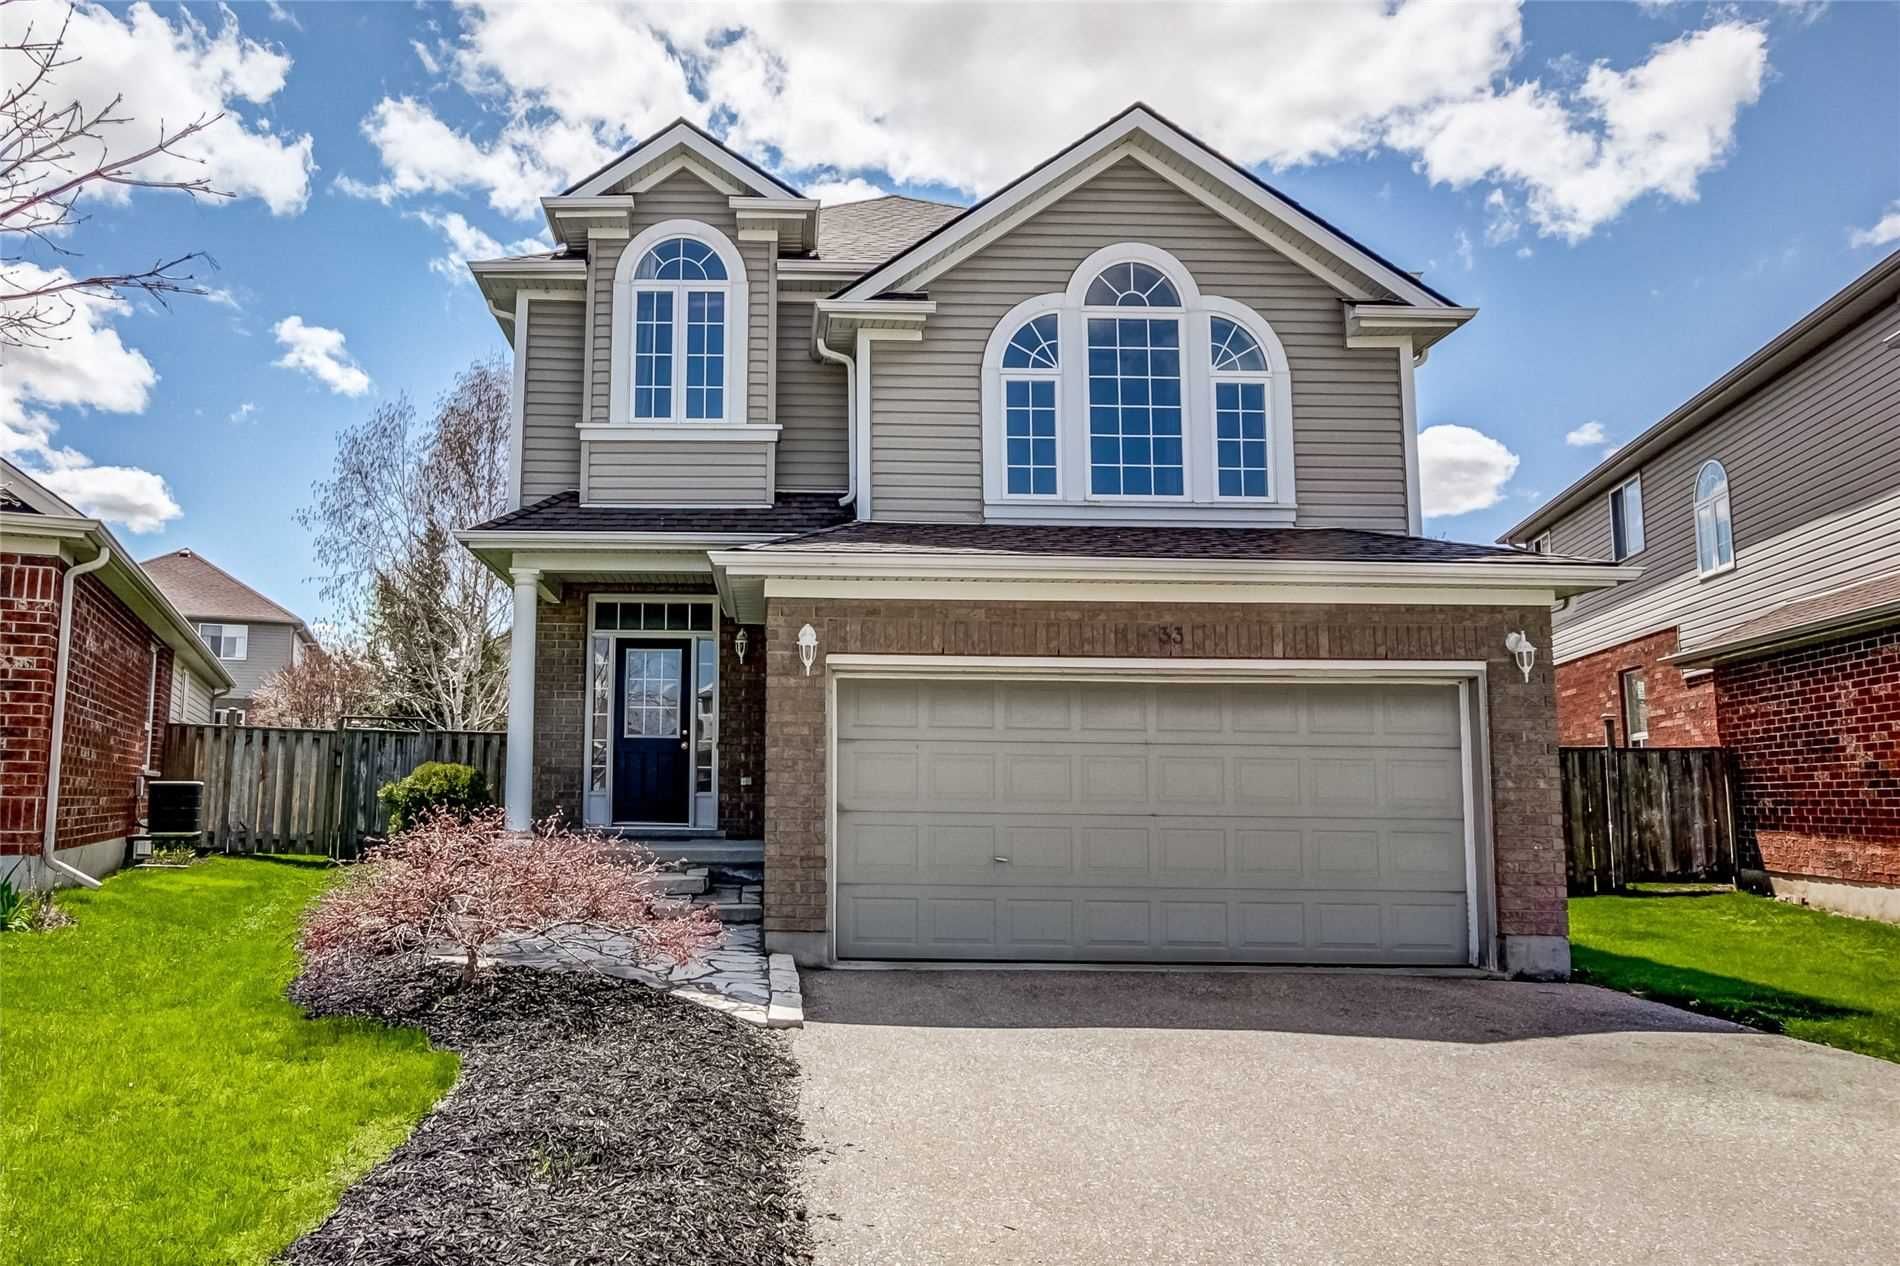 Main Photo: 33 Peer Drive in Guelph: Kortright Hills House (2-Storey) for sale : MLS®# X5233146